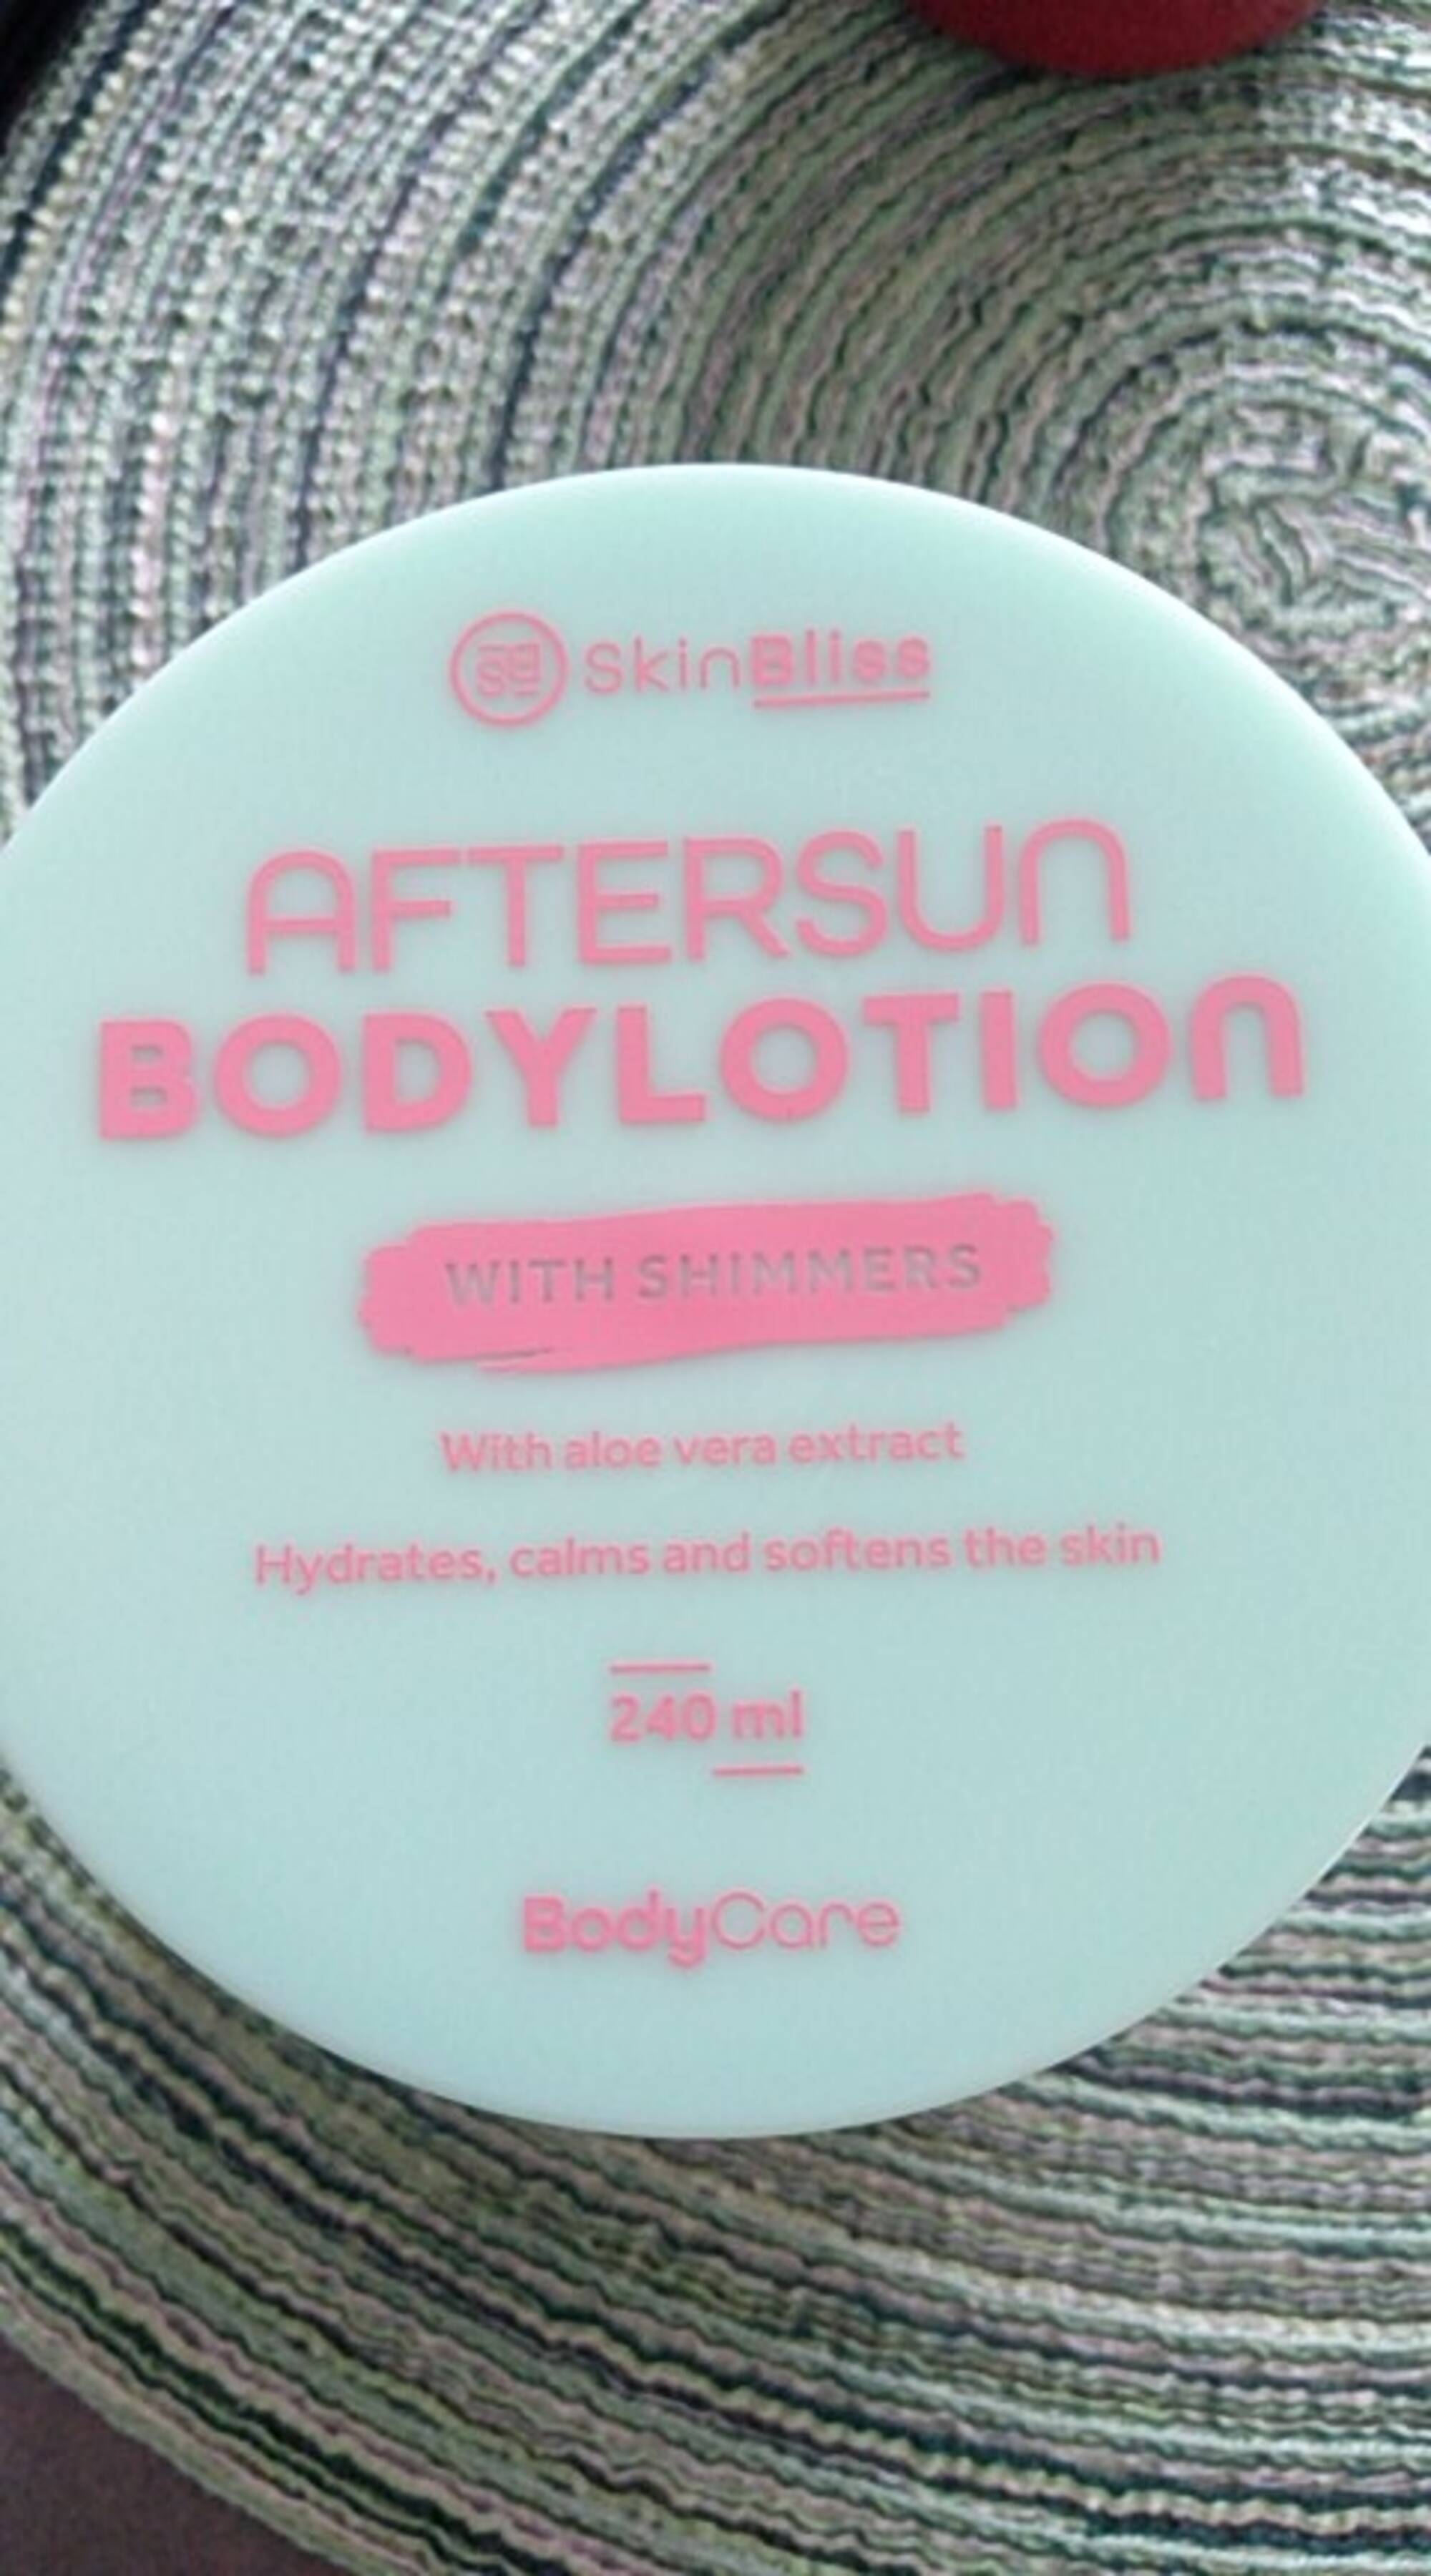 SKINBLISS - After sun - Body lotion  with shimmers